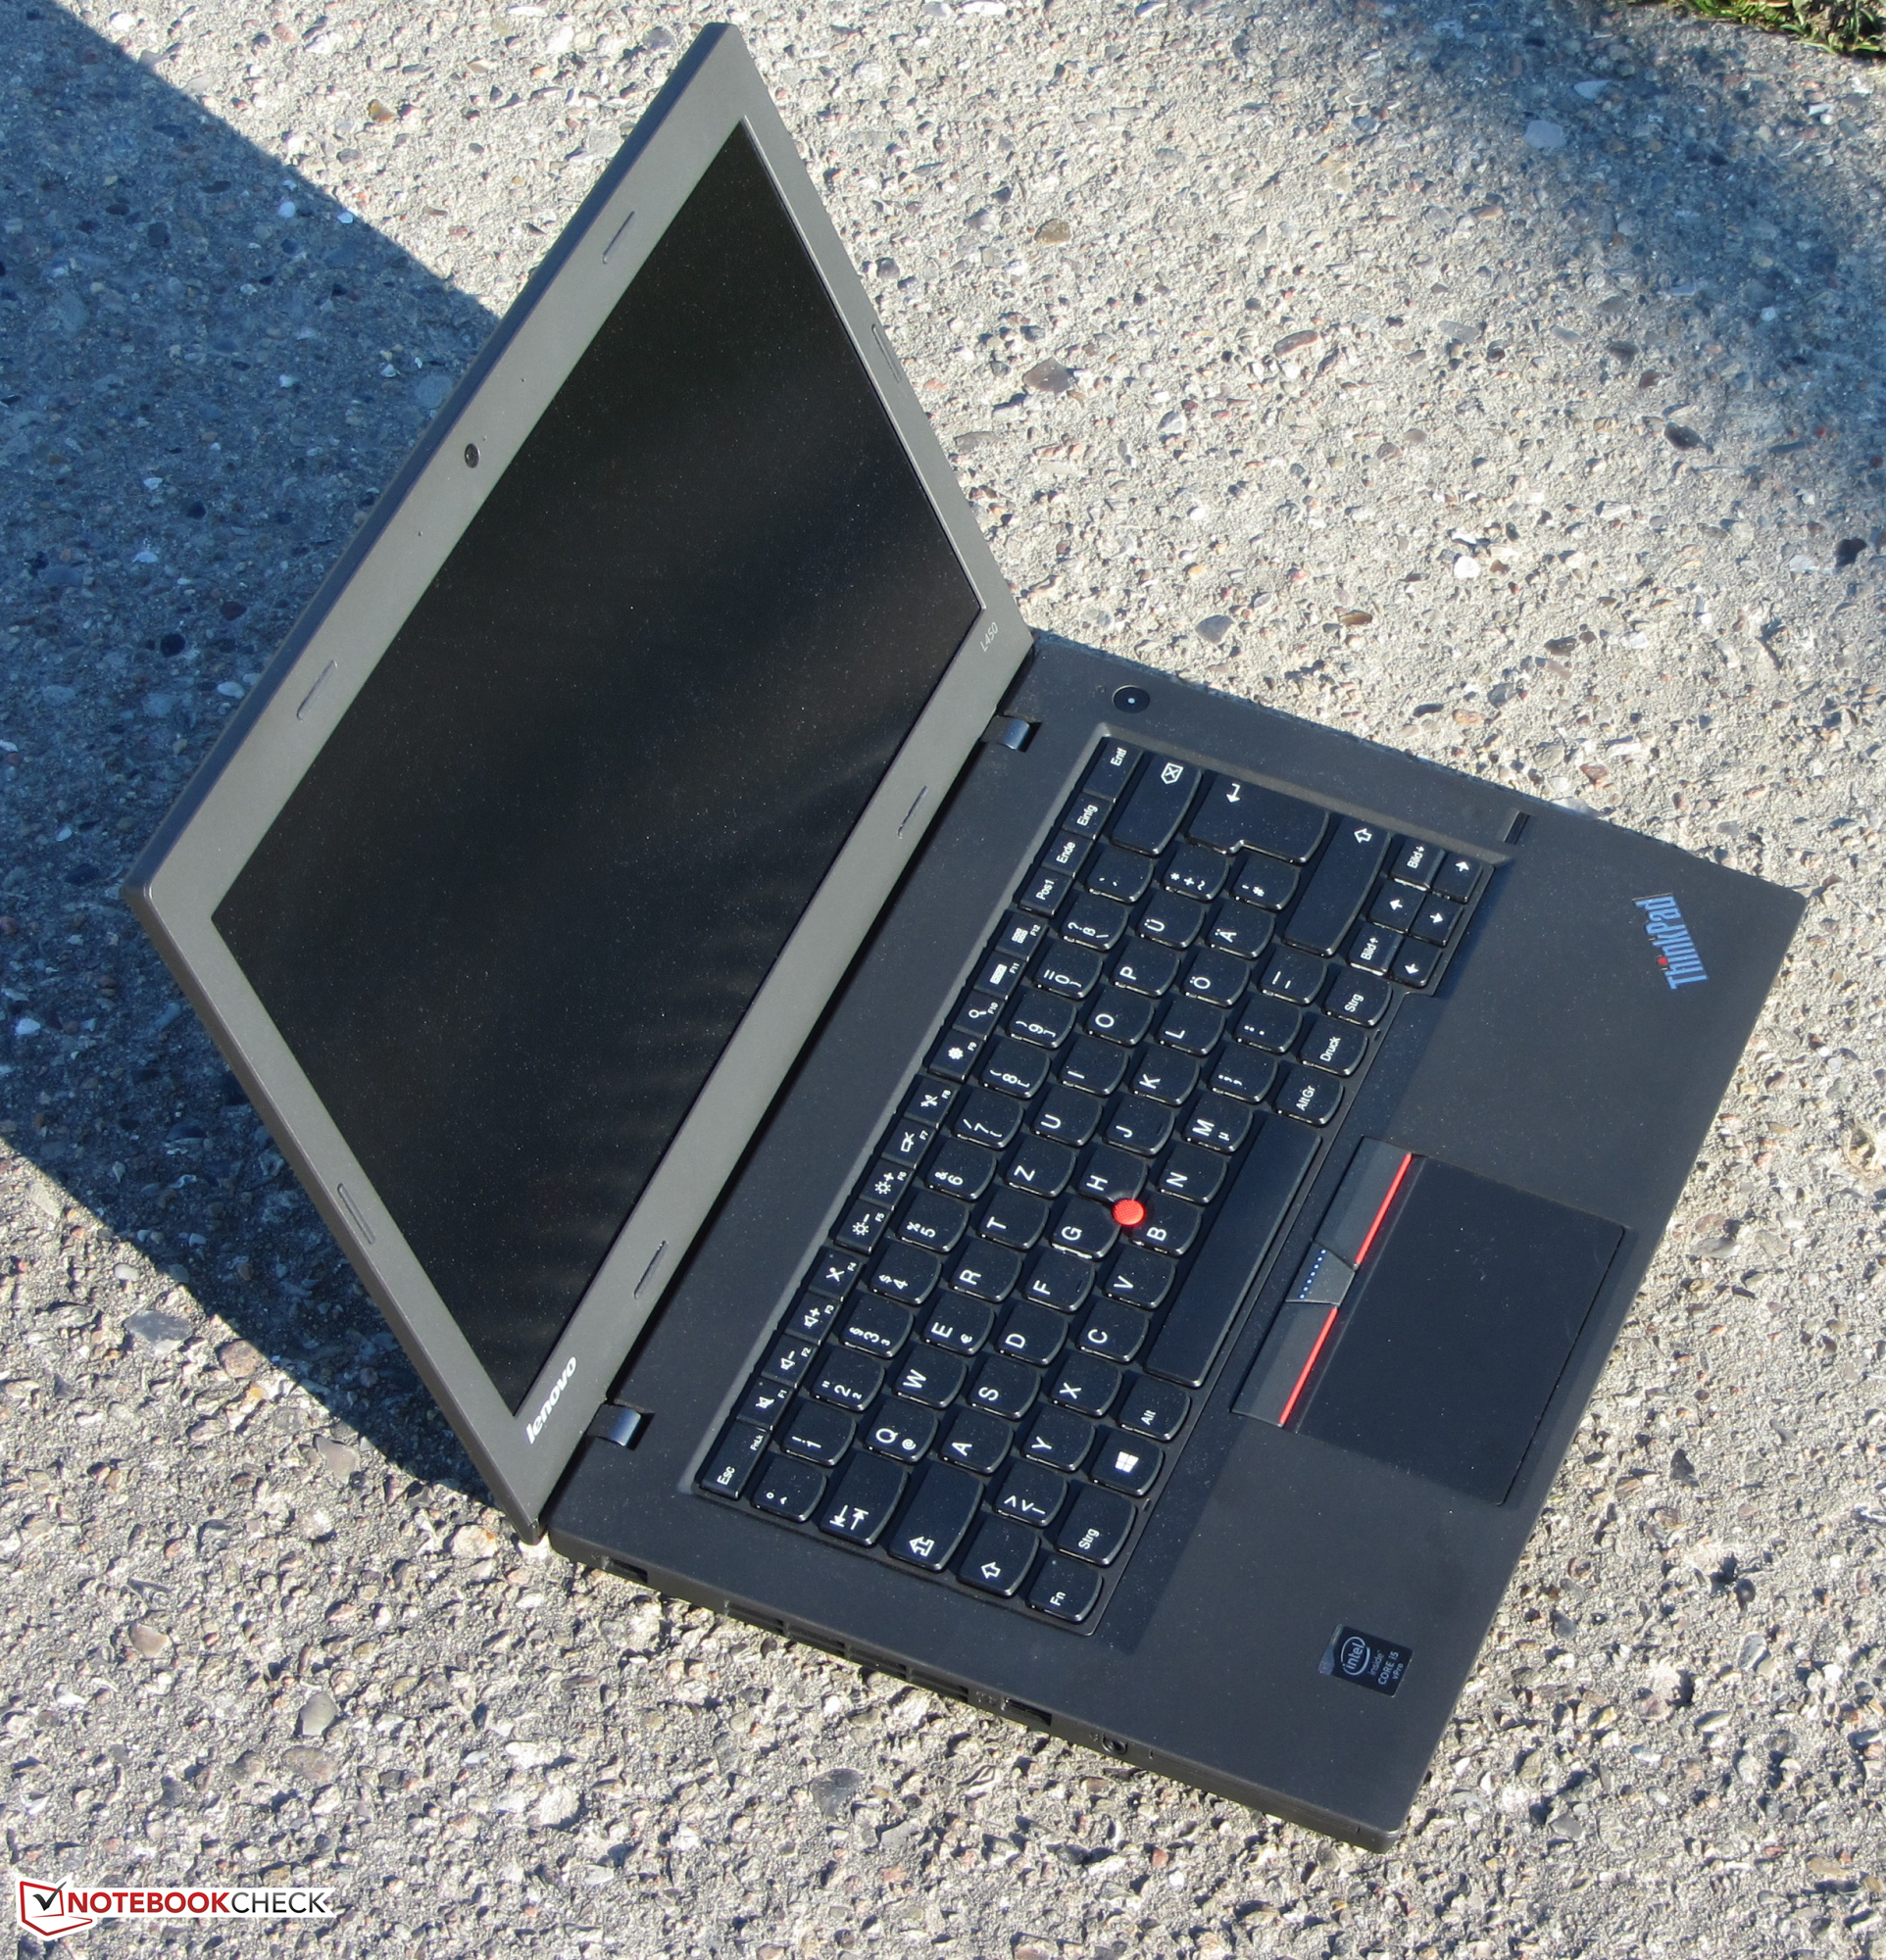 Lenovo ThinkPad L450 Notebook Review - NotebookCheck.net Reviews